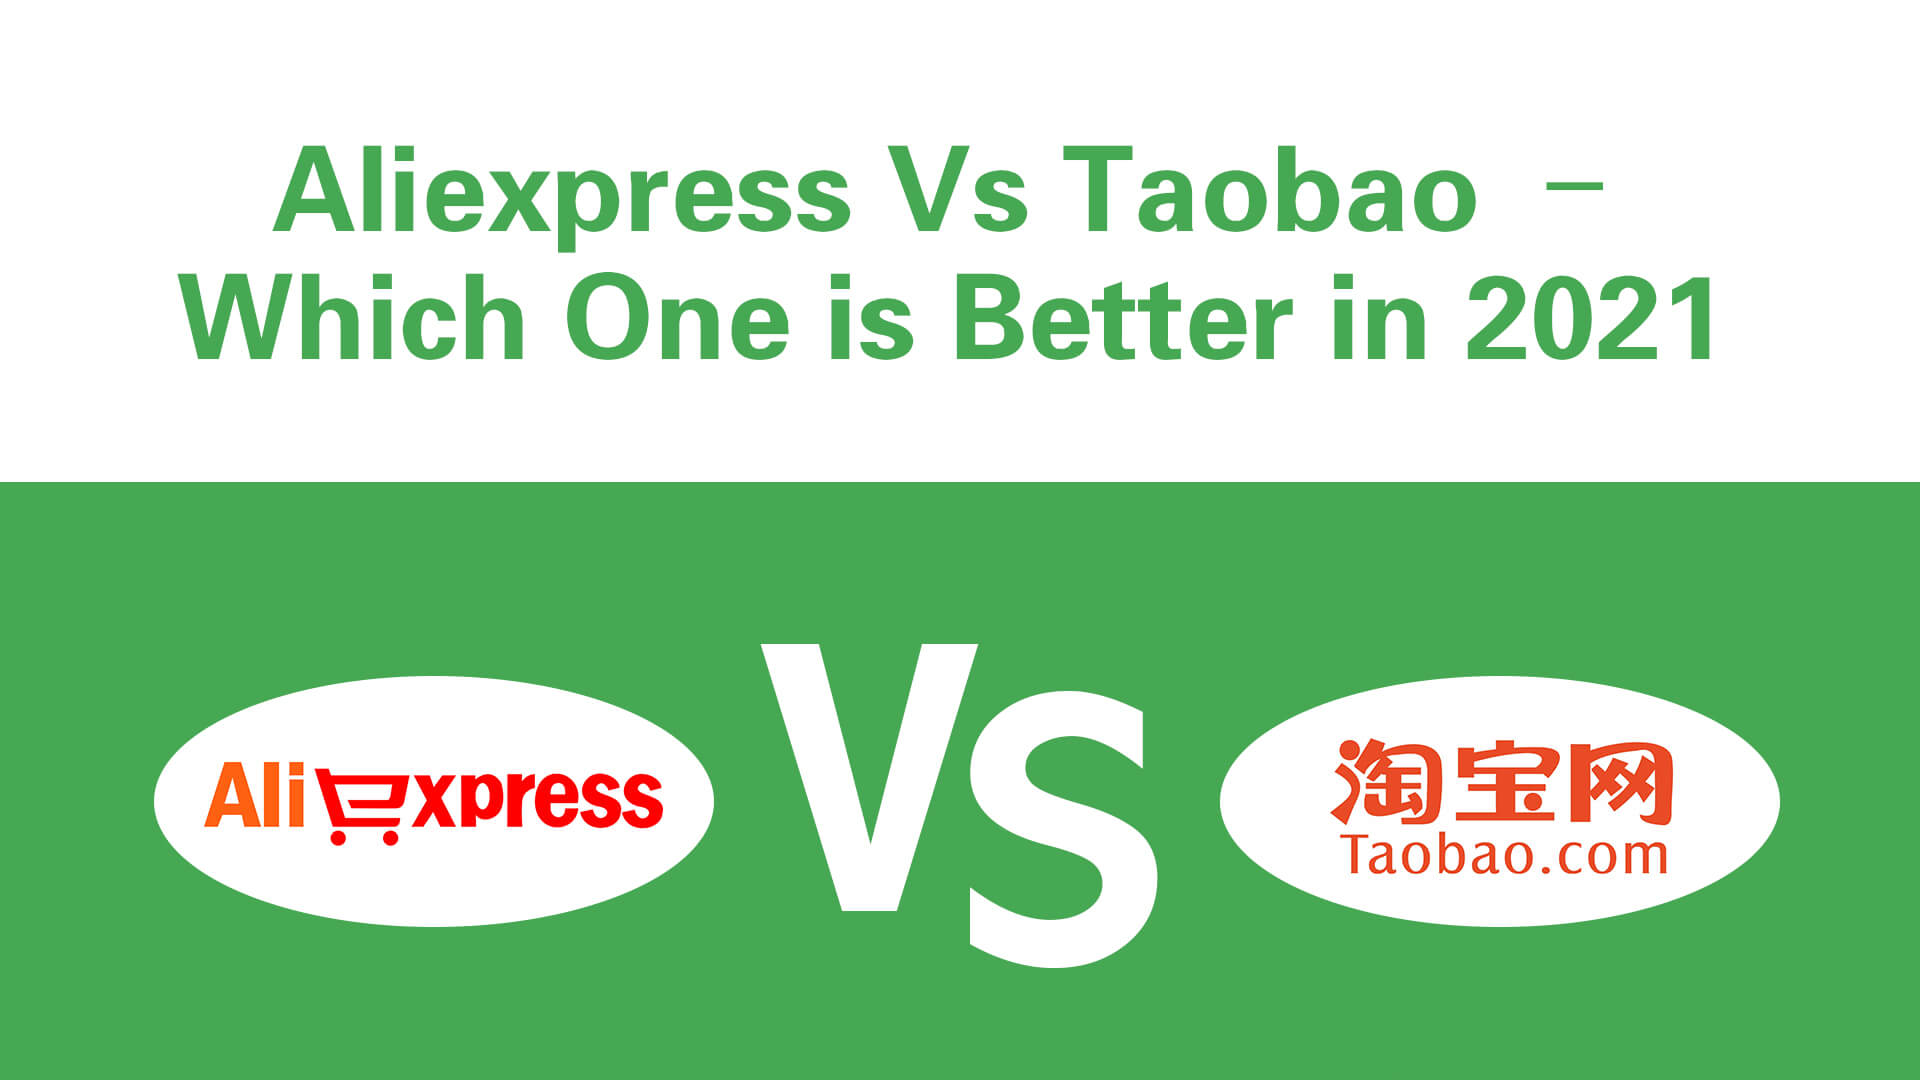 Aliexpress Vs Taobao – Which One is Better in 2021?